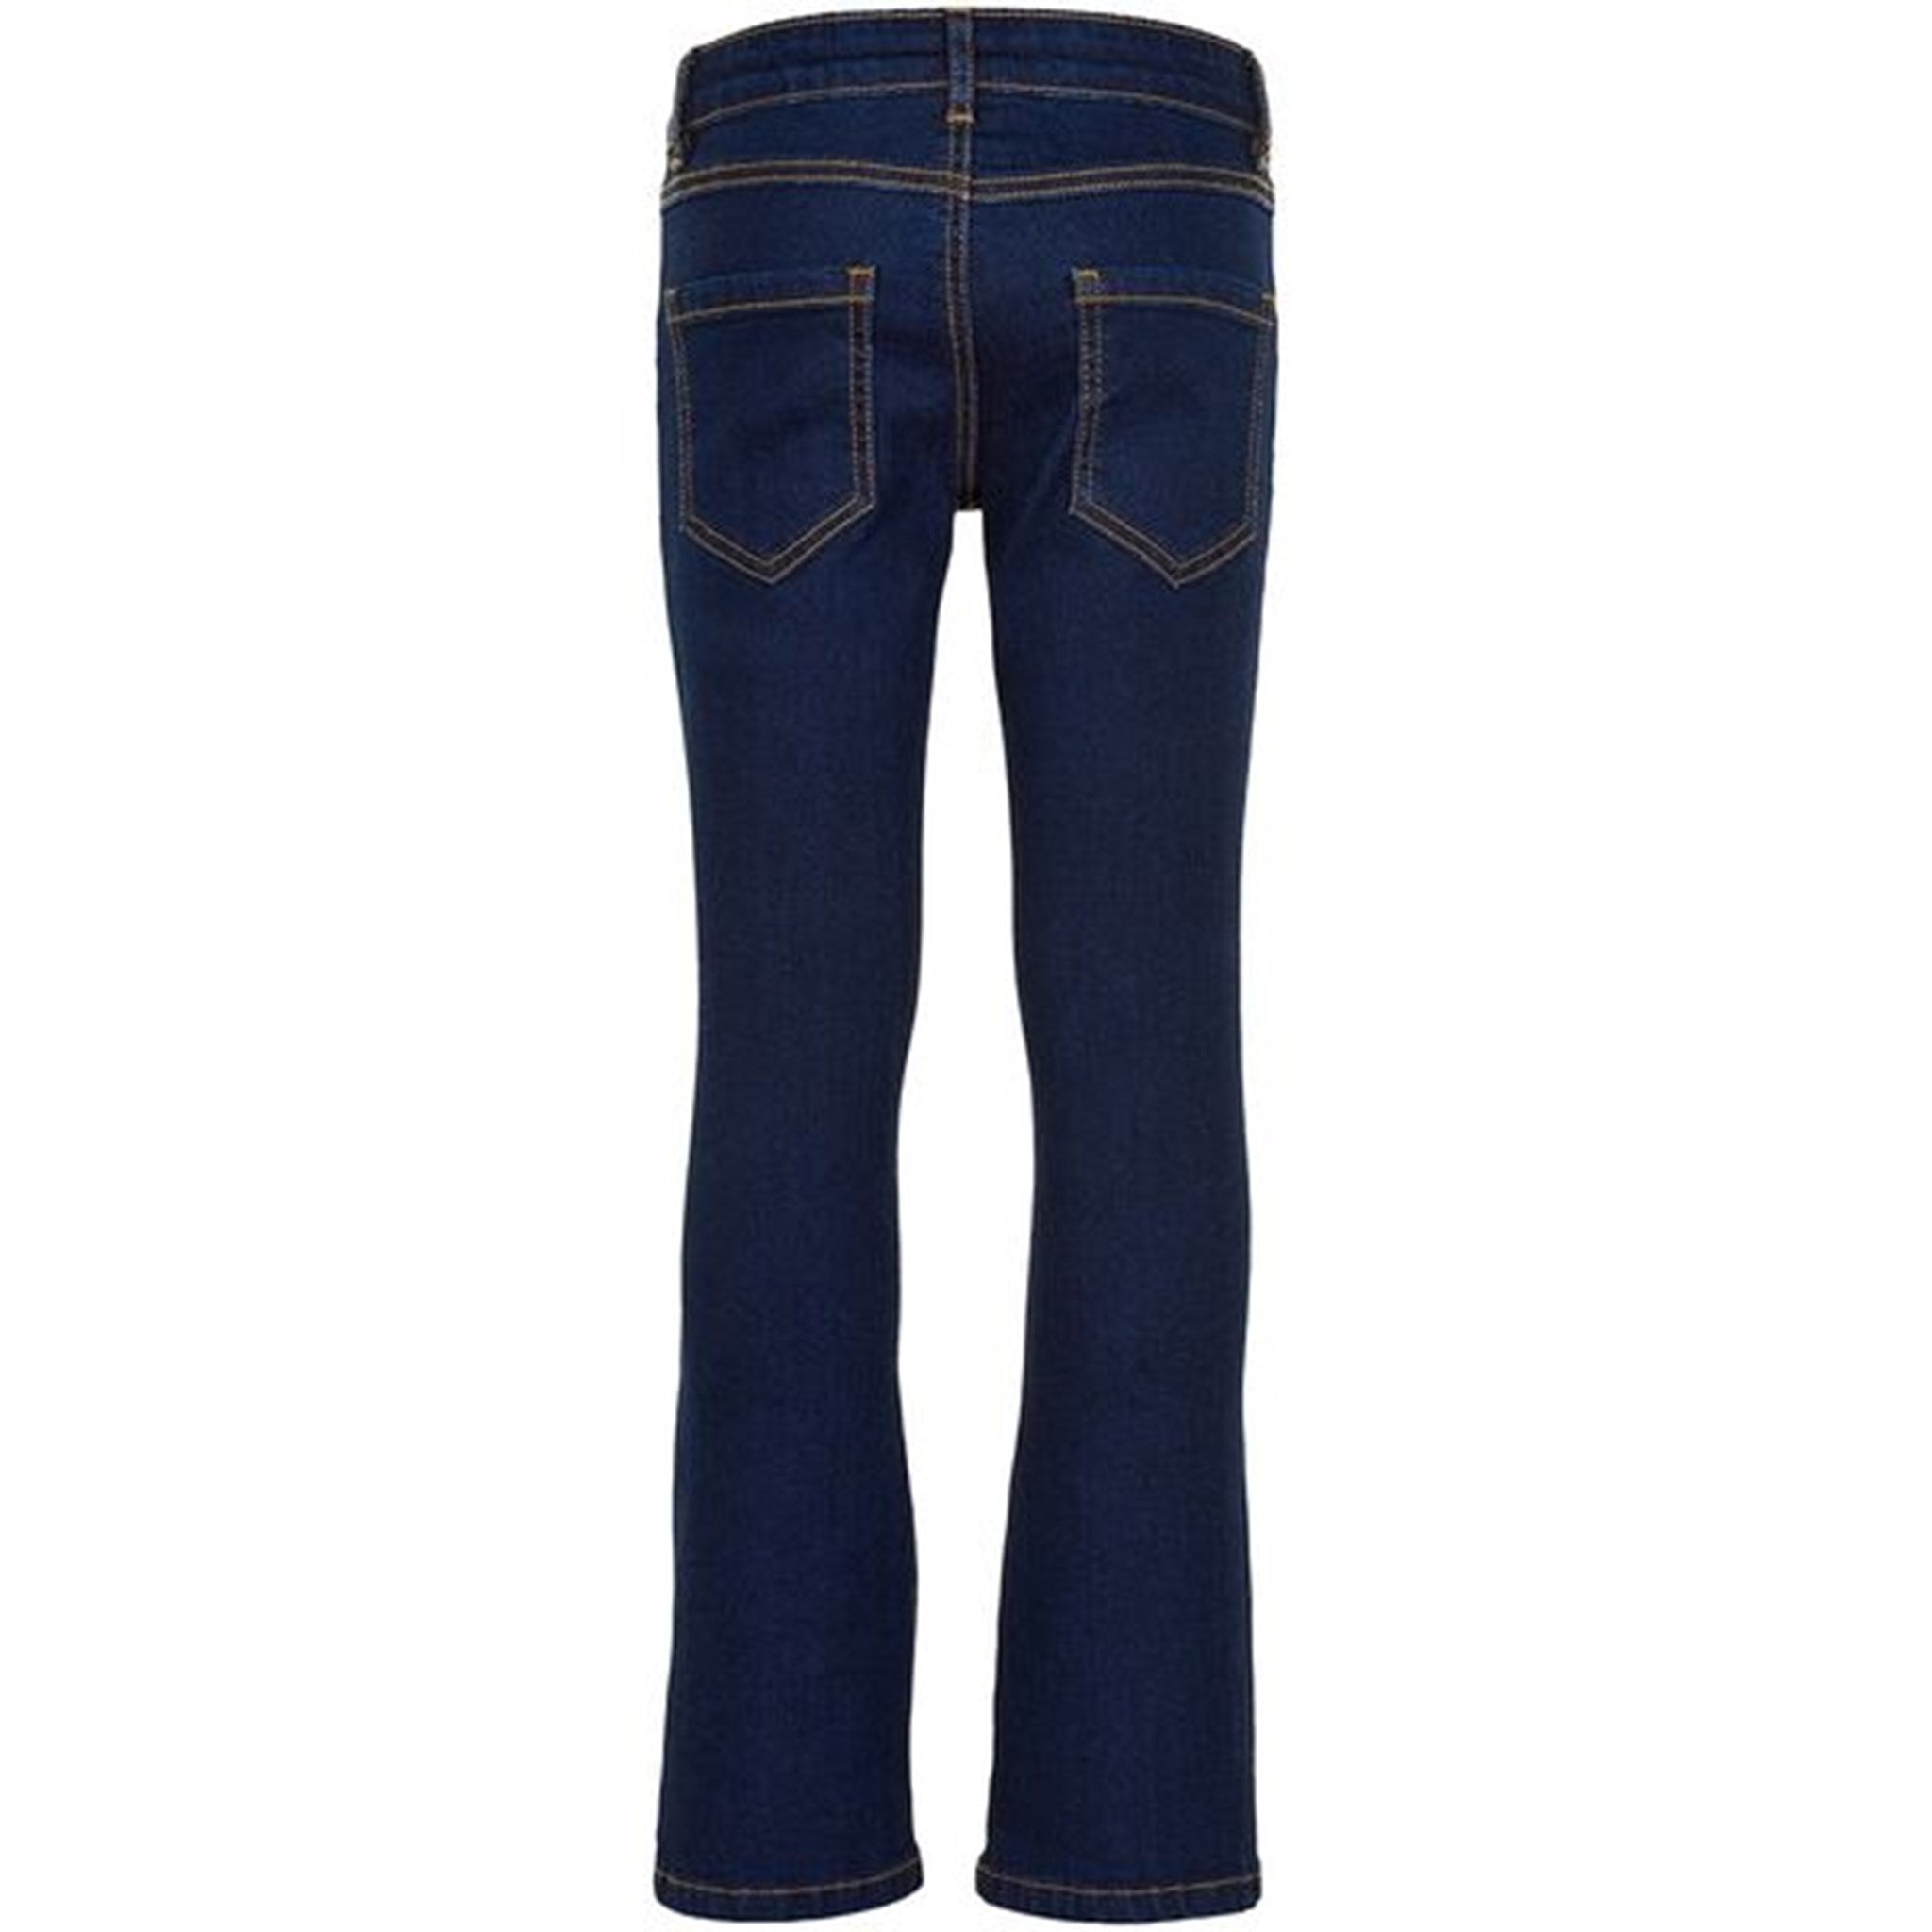 The New Flared Jeans Unwashed Denim 2